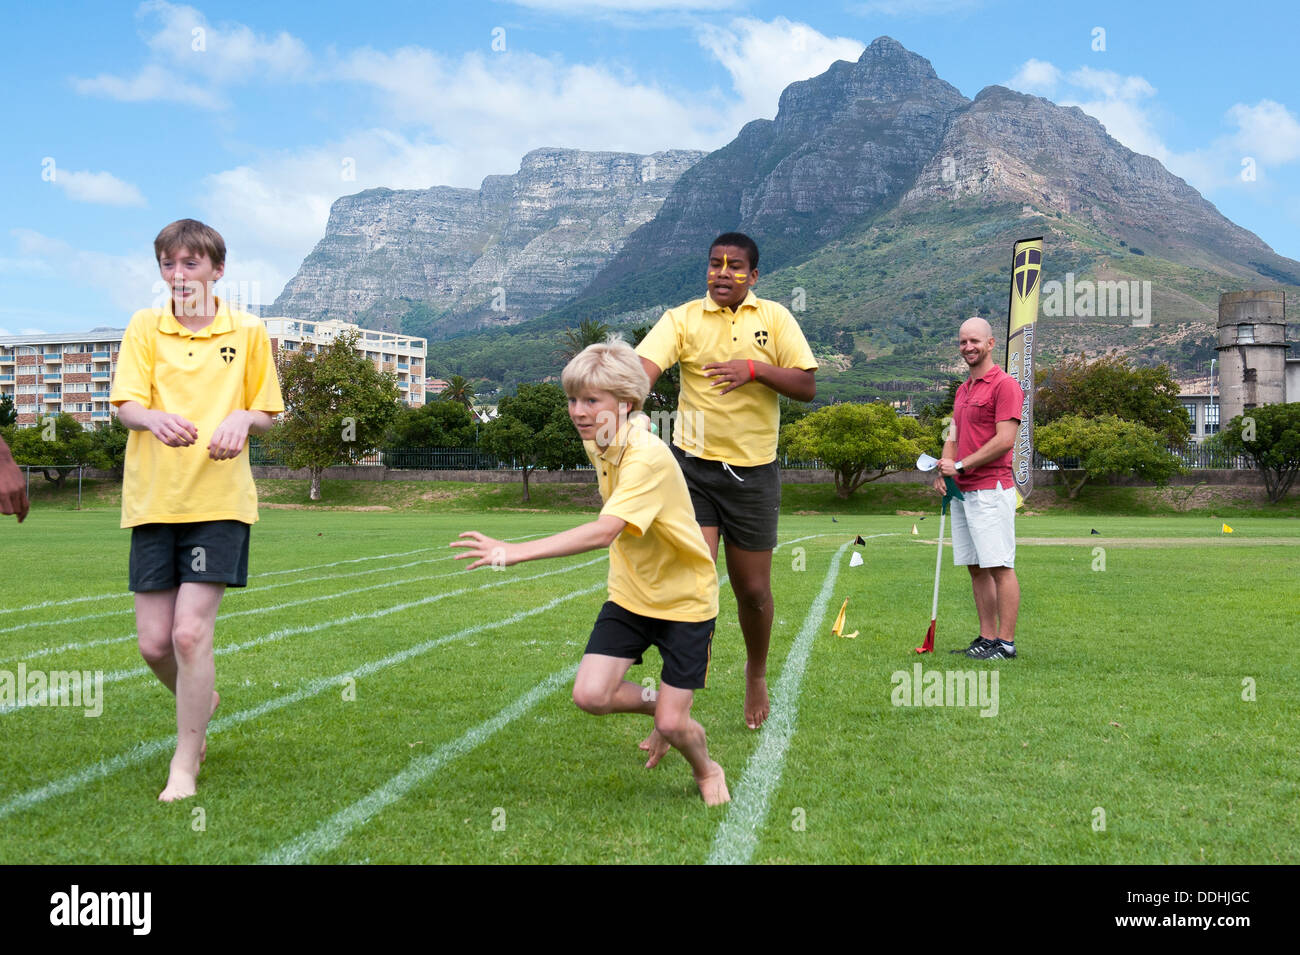 Relay race in a running competition at St. George's School, Cape Town, South Africa Stock Photo